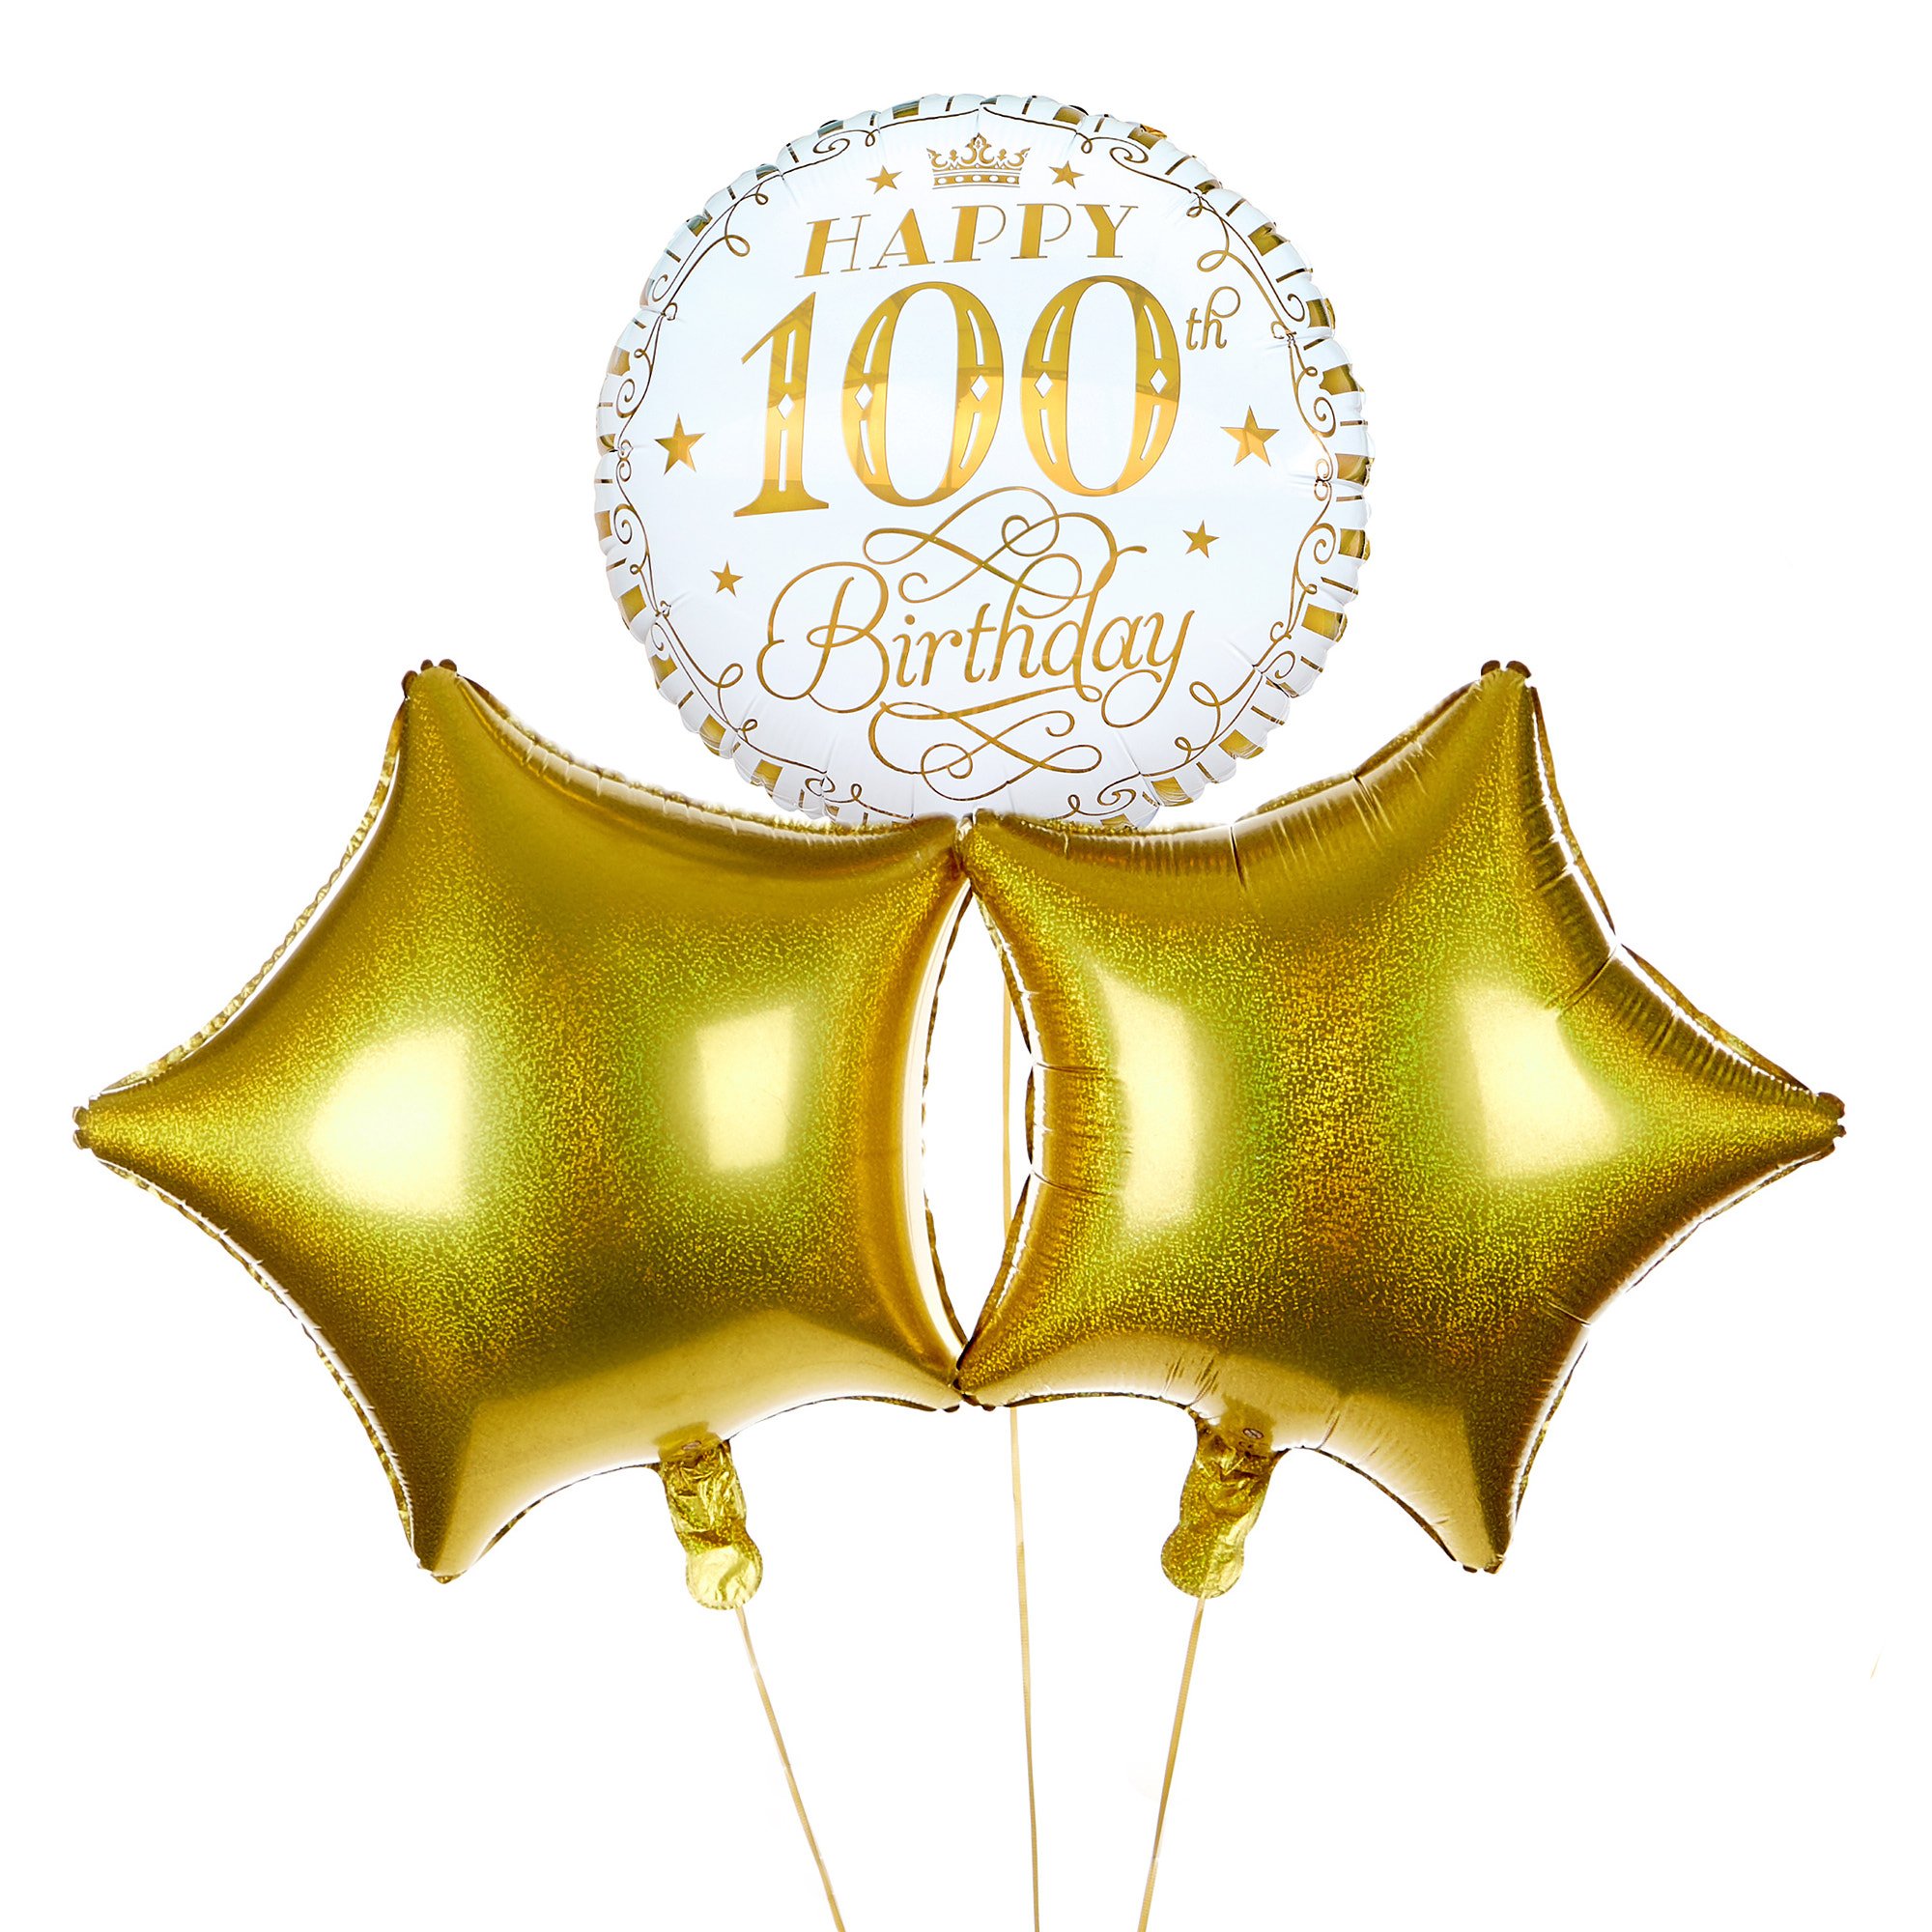 White & Gold 100th Birthday Balloon Bouquet - DELIVERED INFLATED!